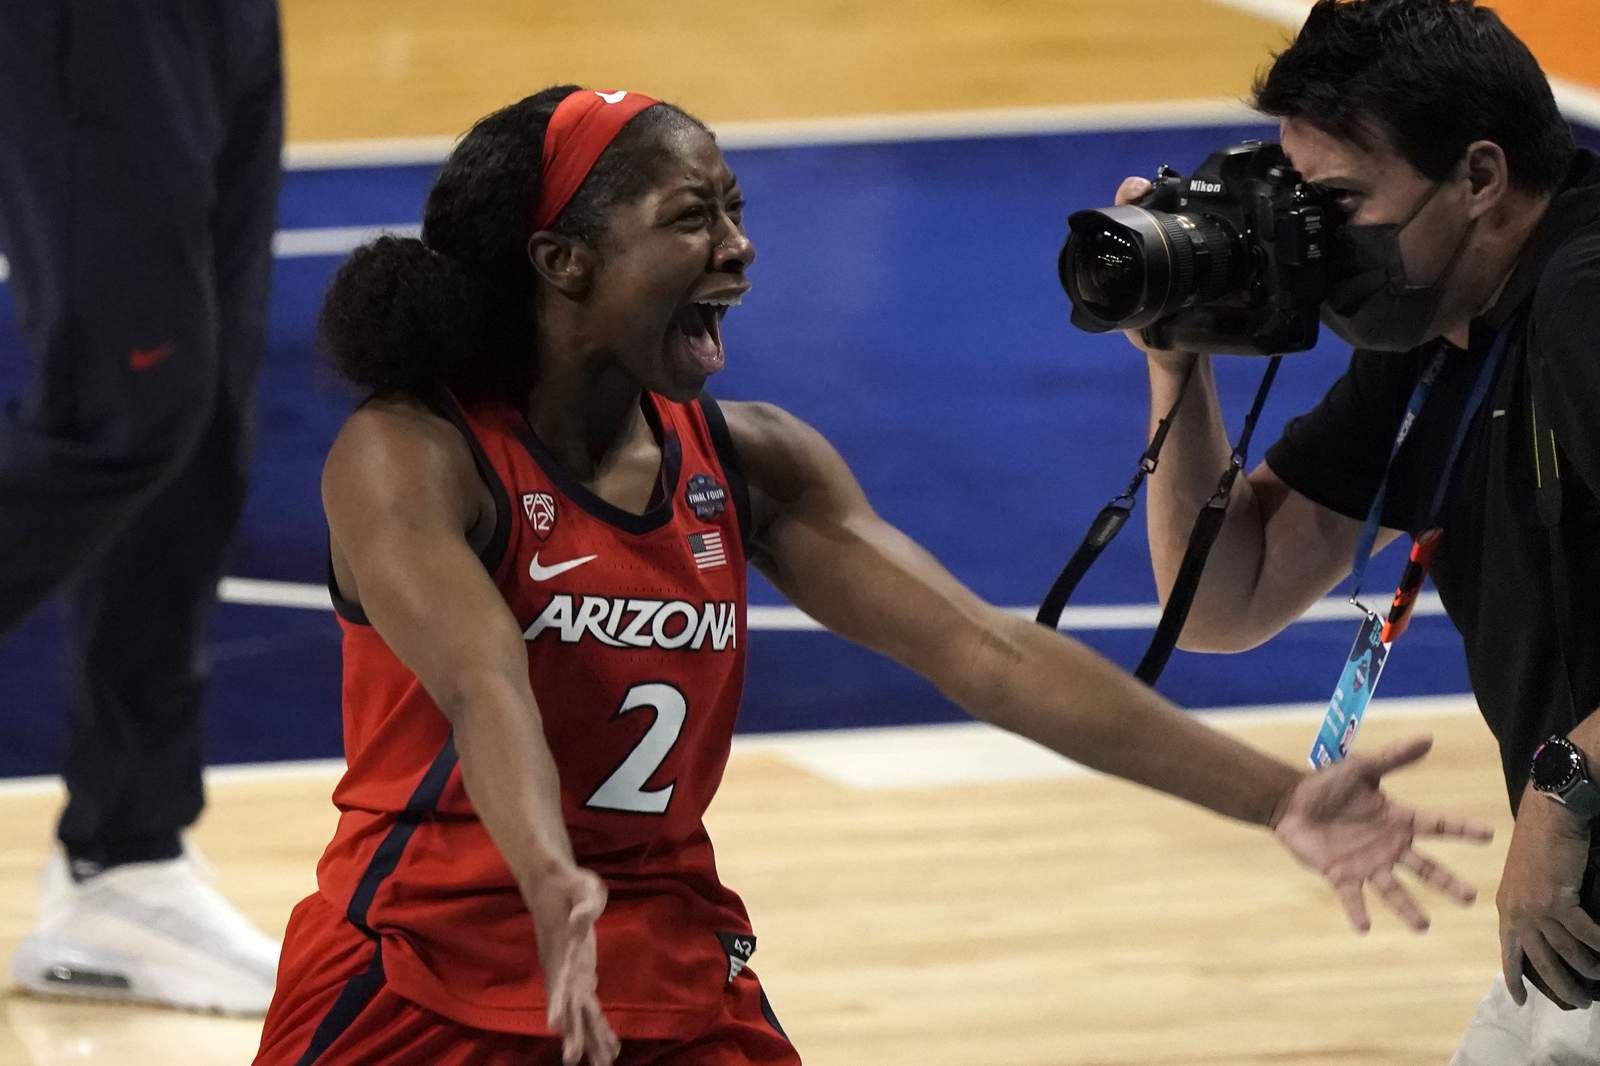 Arizona reaches NCAA title game with 69-59 win over UConn